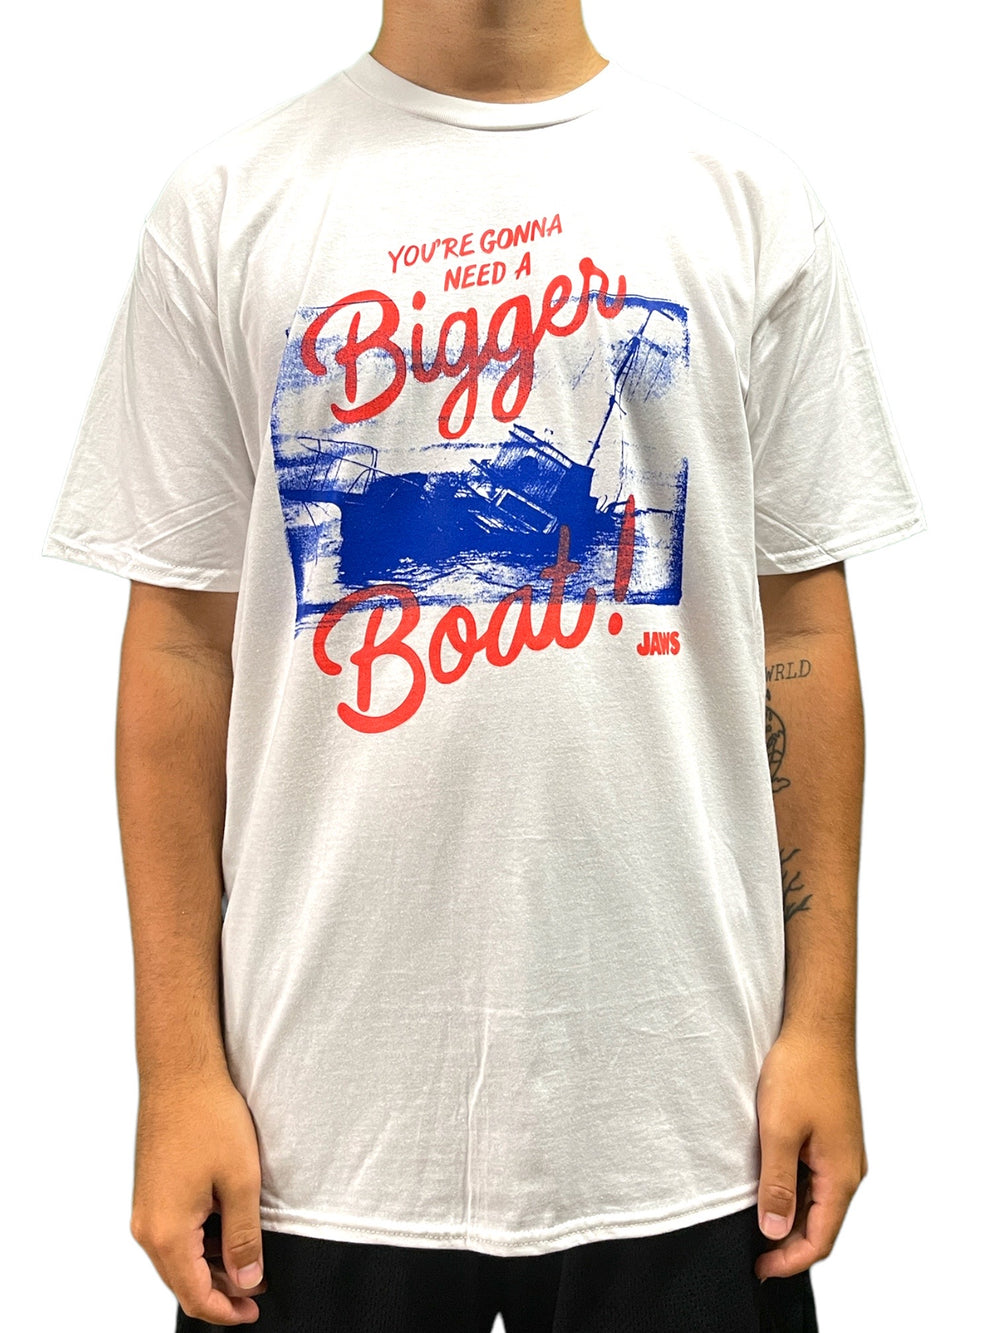 Jaws Bigger Boat Unisex Official T Shirt Brand New Various Sizes